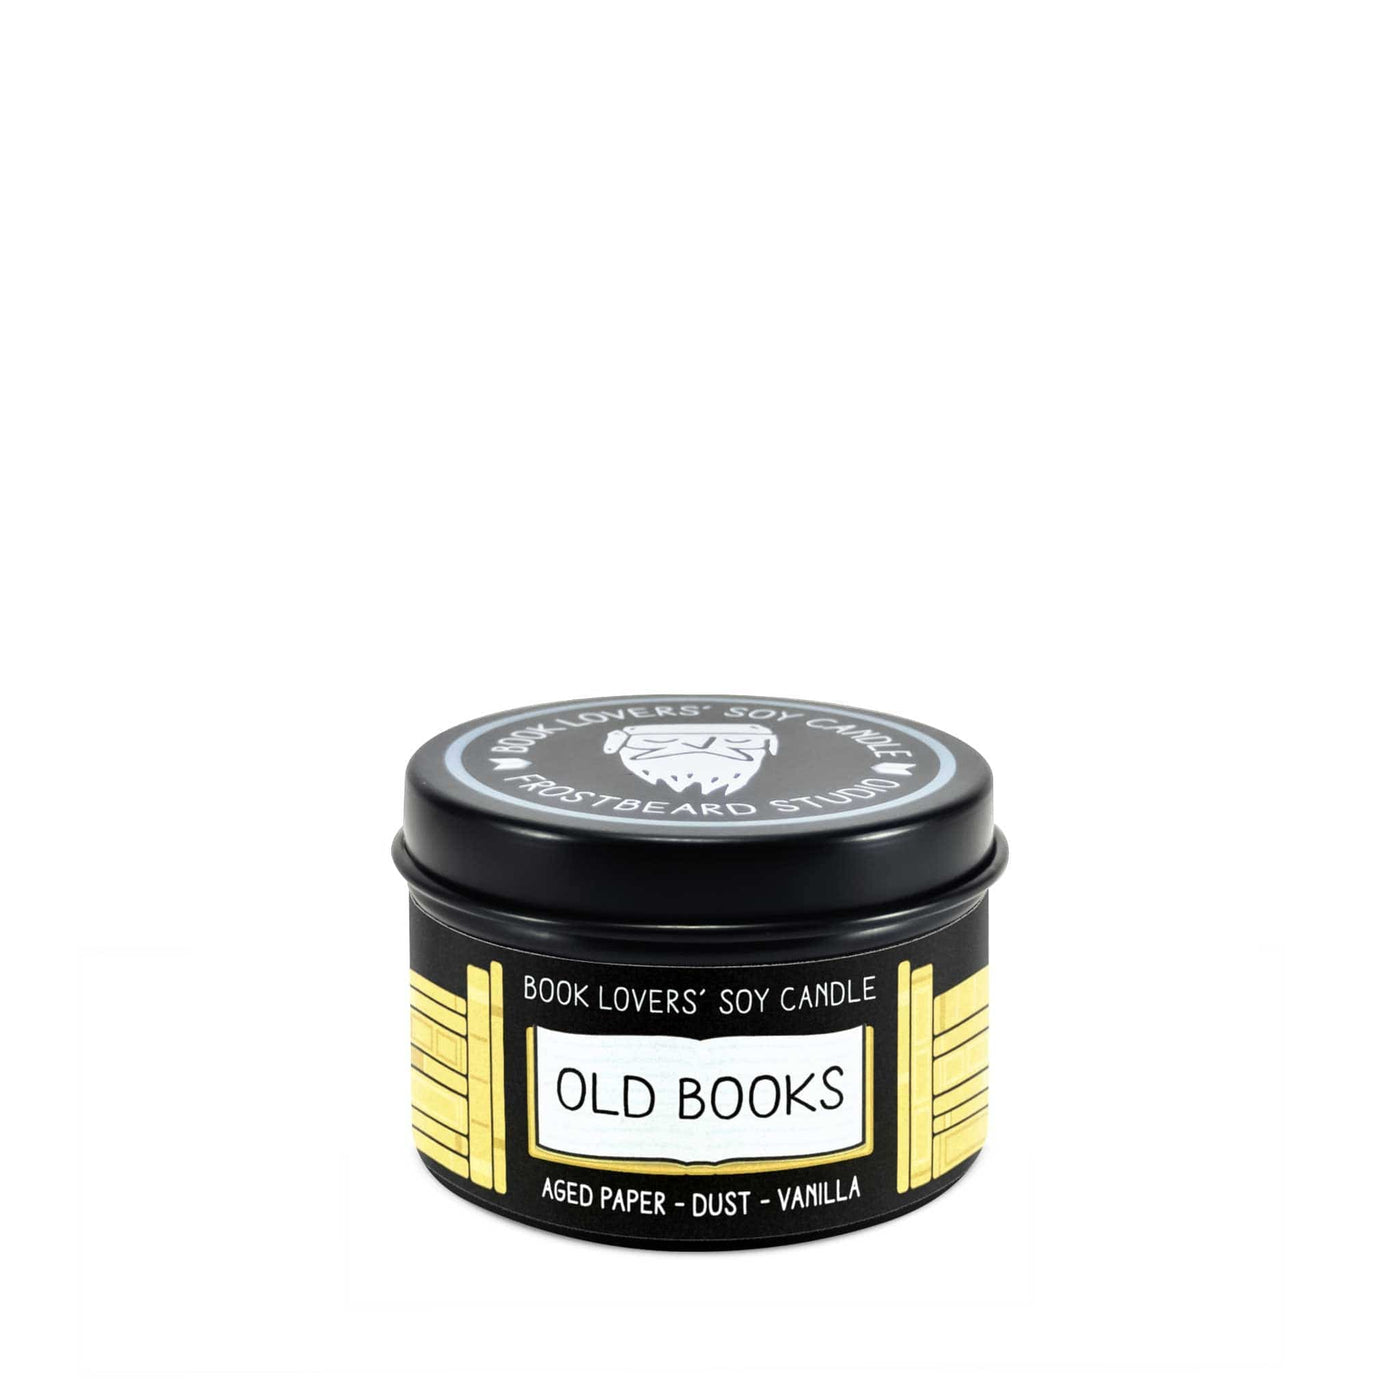 Old Books  -  2 oz Tin  -  Book Lovers' Soy Candle  -  Frostbeard Studio